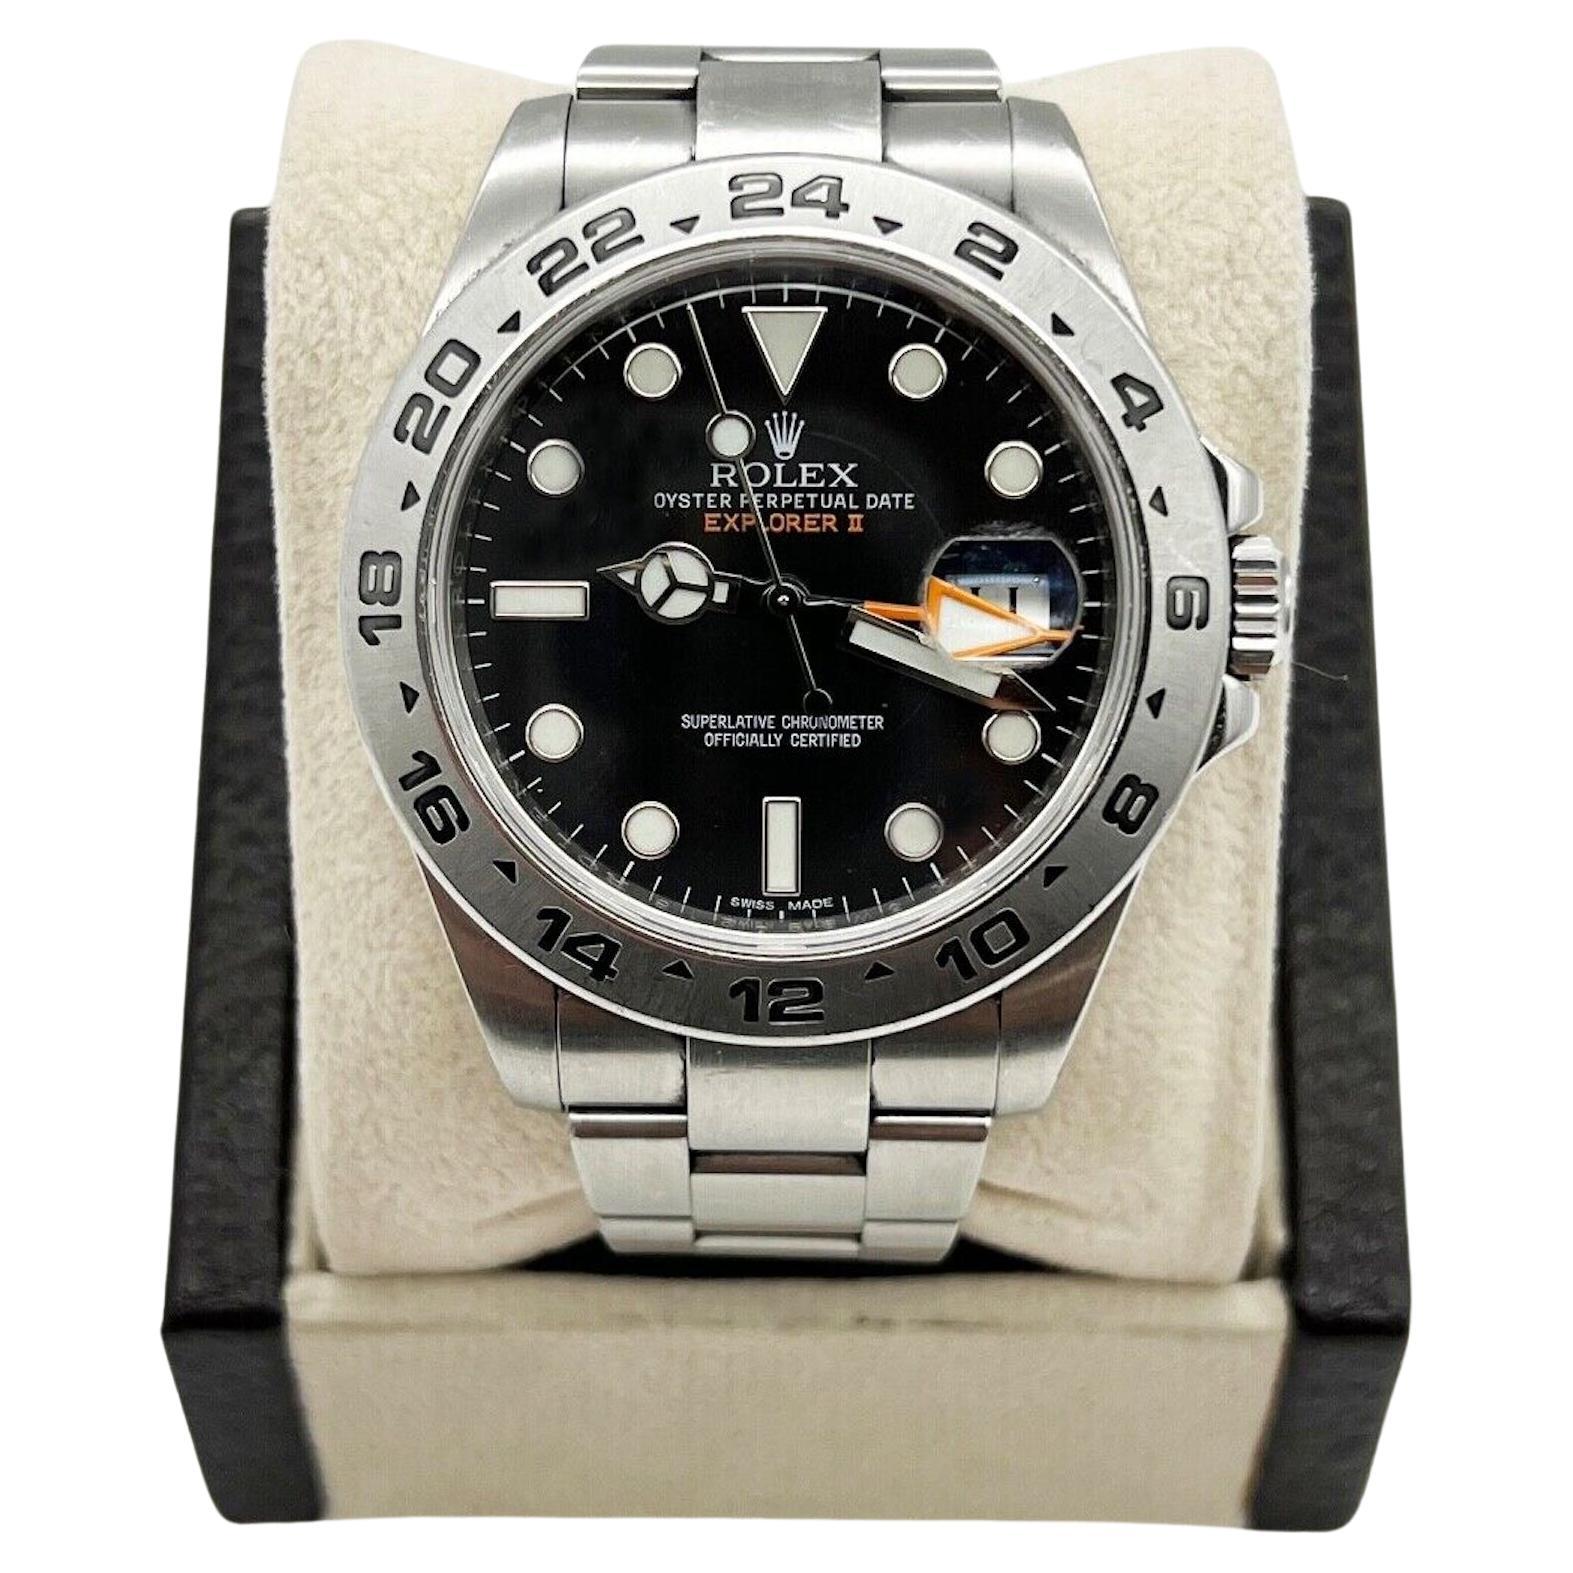 Rolex Explorer II 216570 Black Dial 42mm Stainless Steel Box Paper For Sale